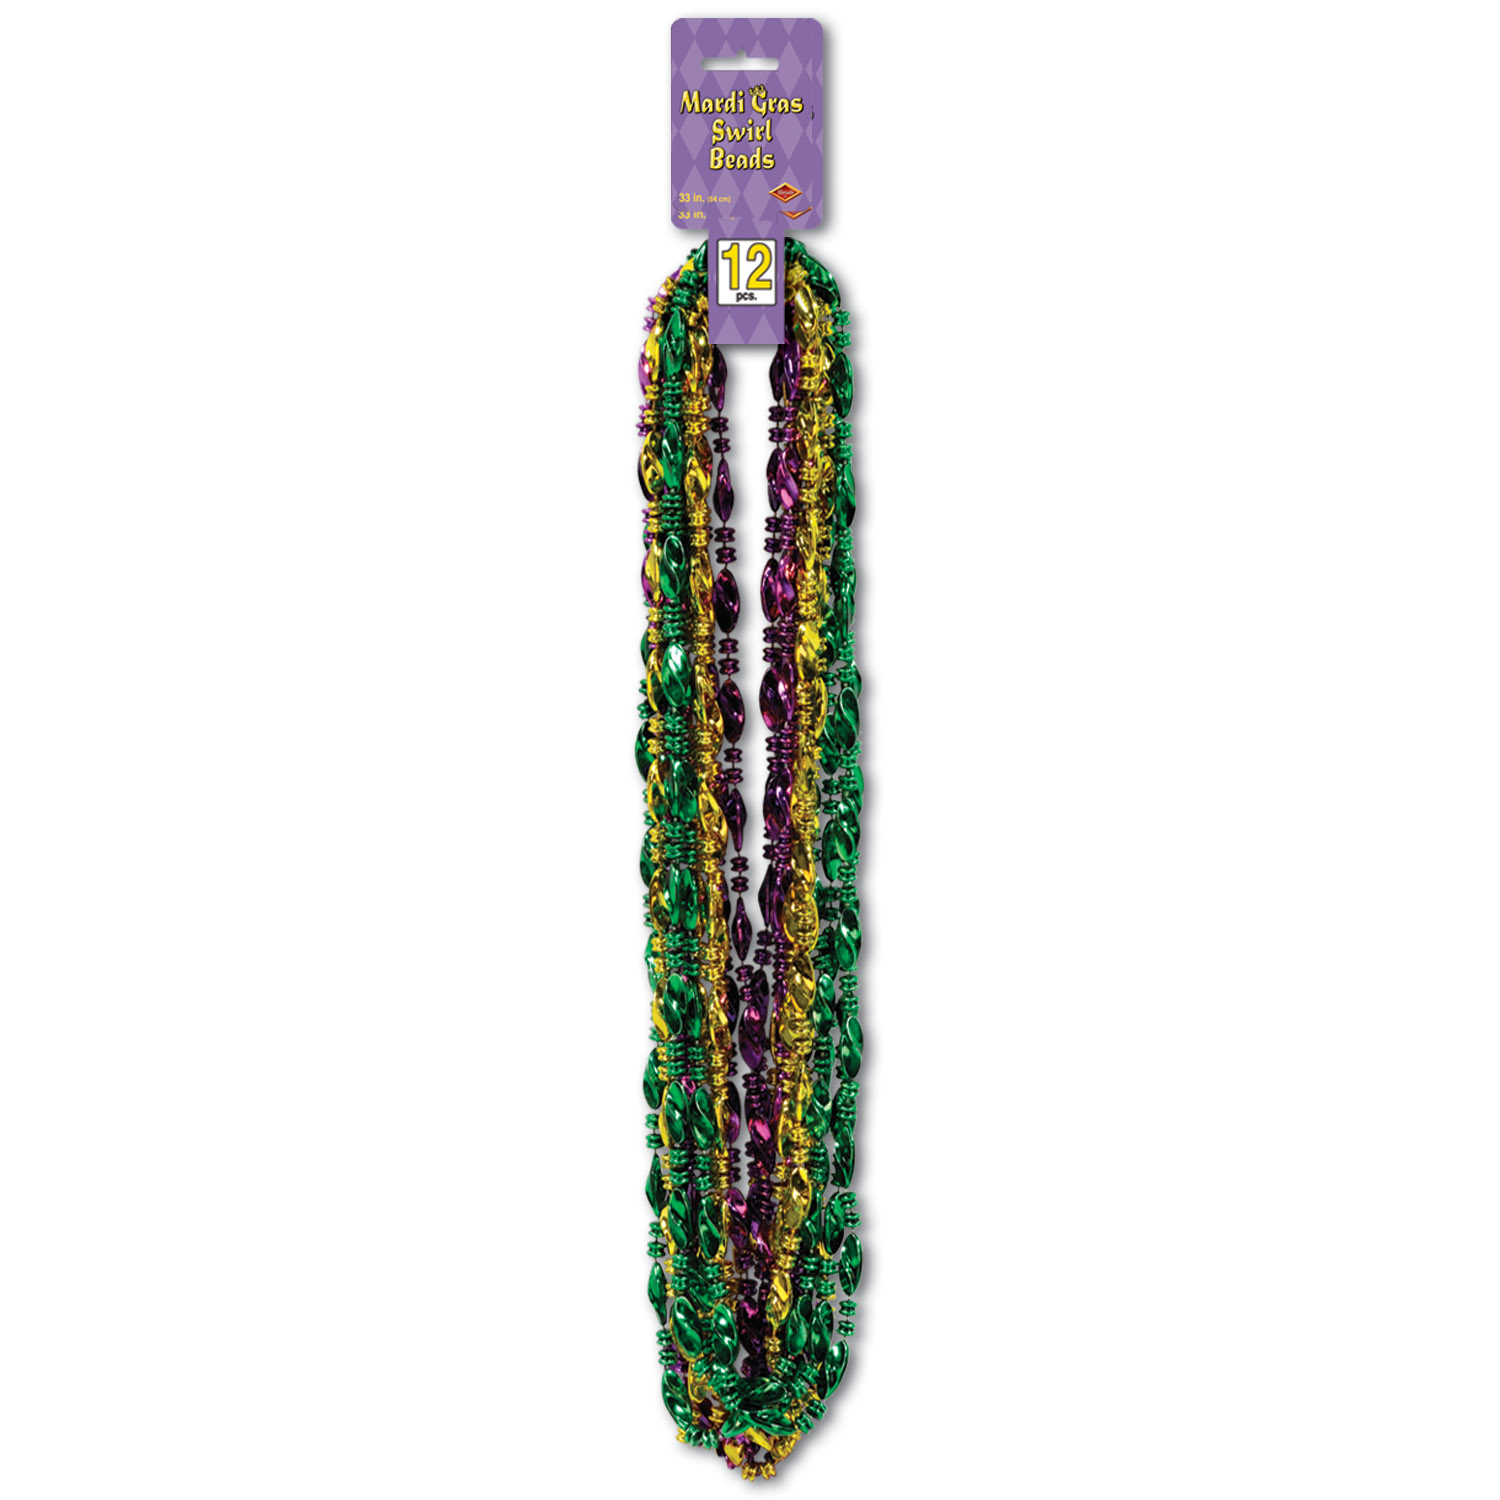 green gold and purple beads that have a swirl design around the necklace